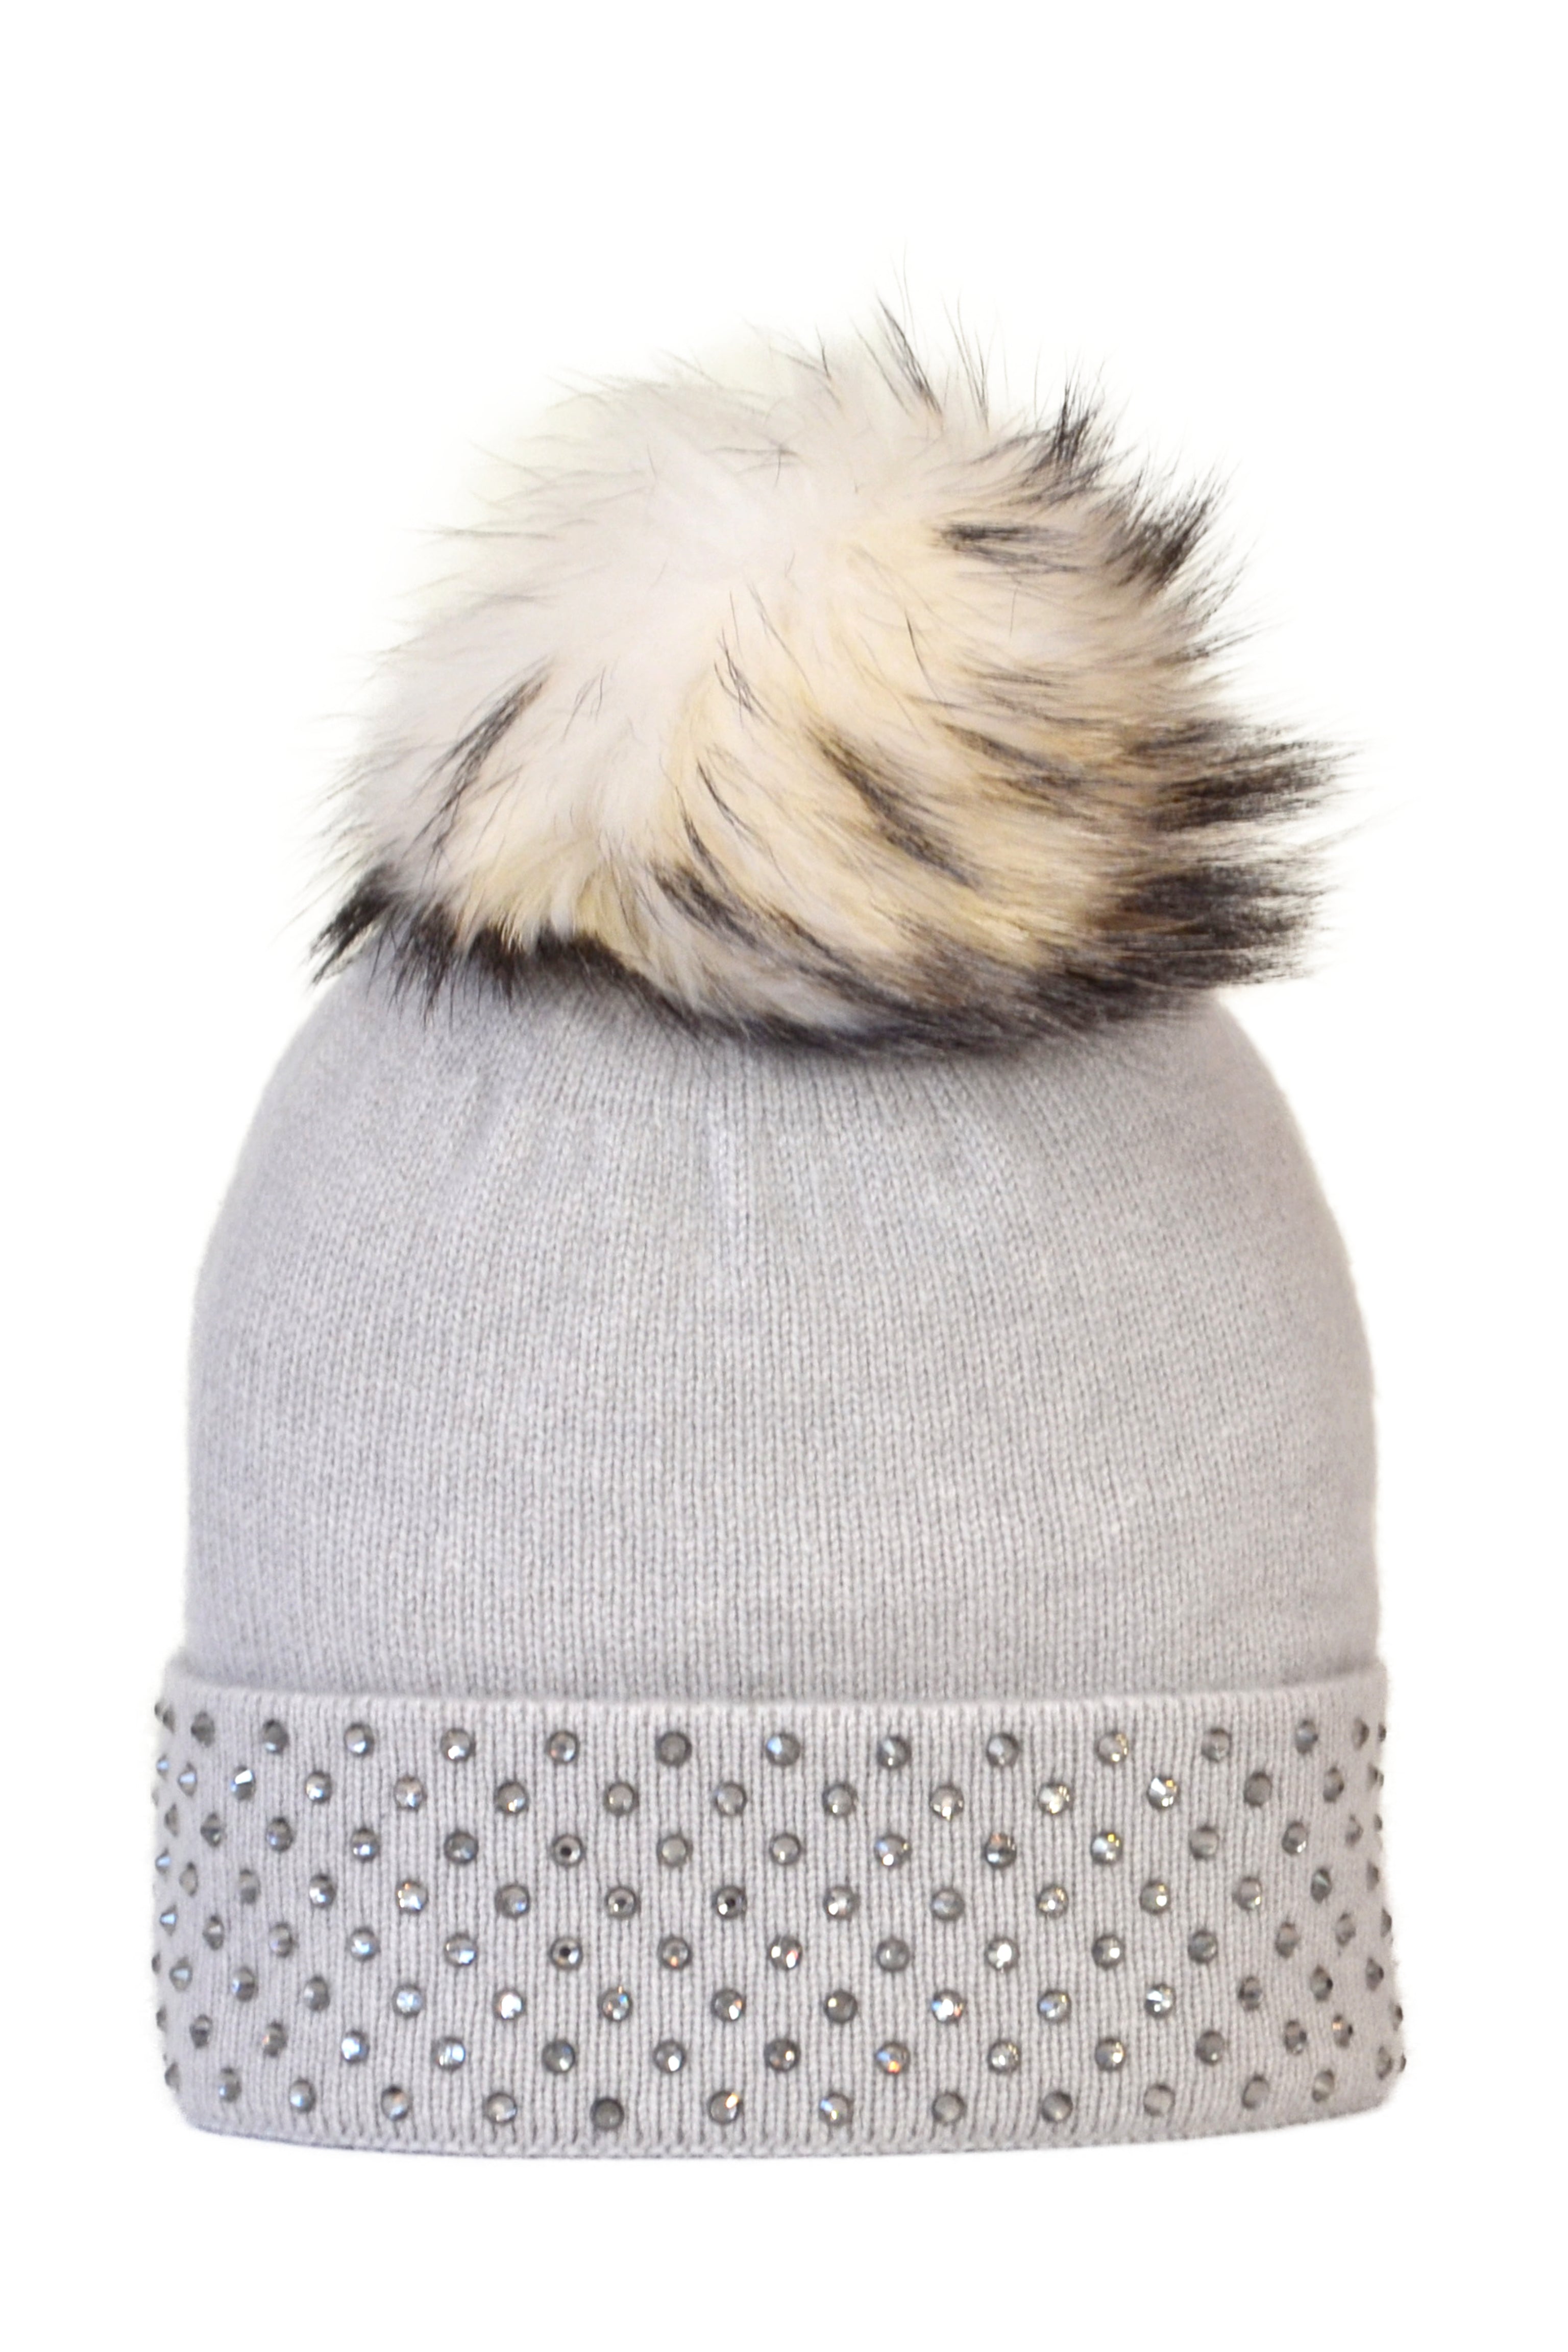 Dove Gray Cashmere Beanie with Crystals on Fold Over & Ivory Pom